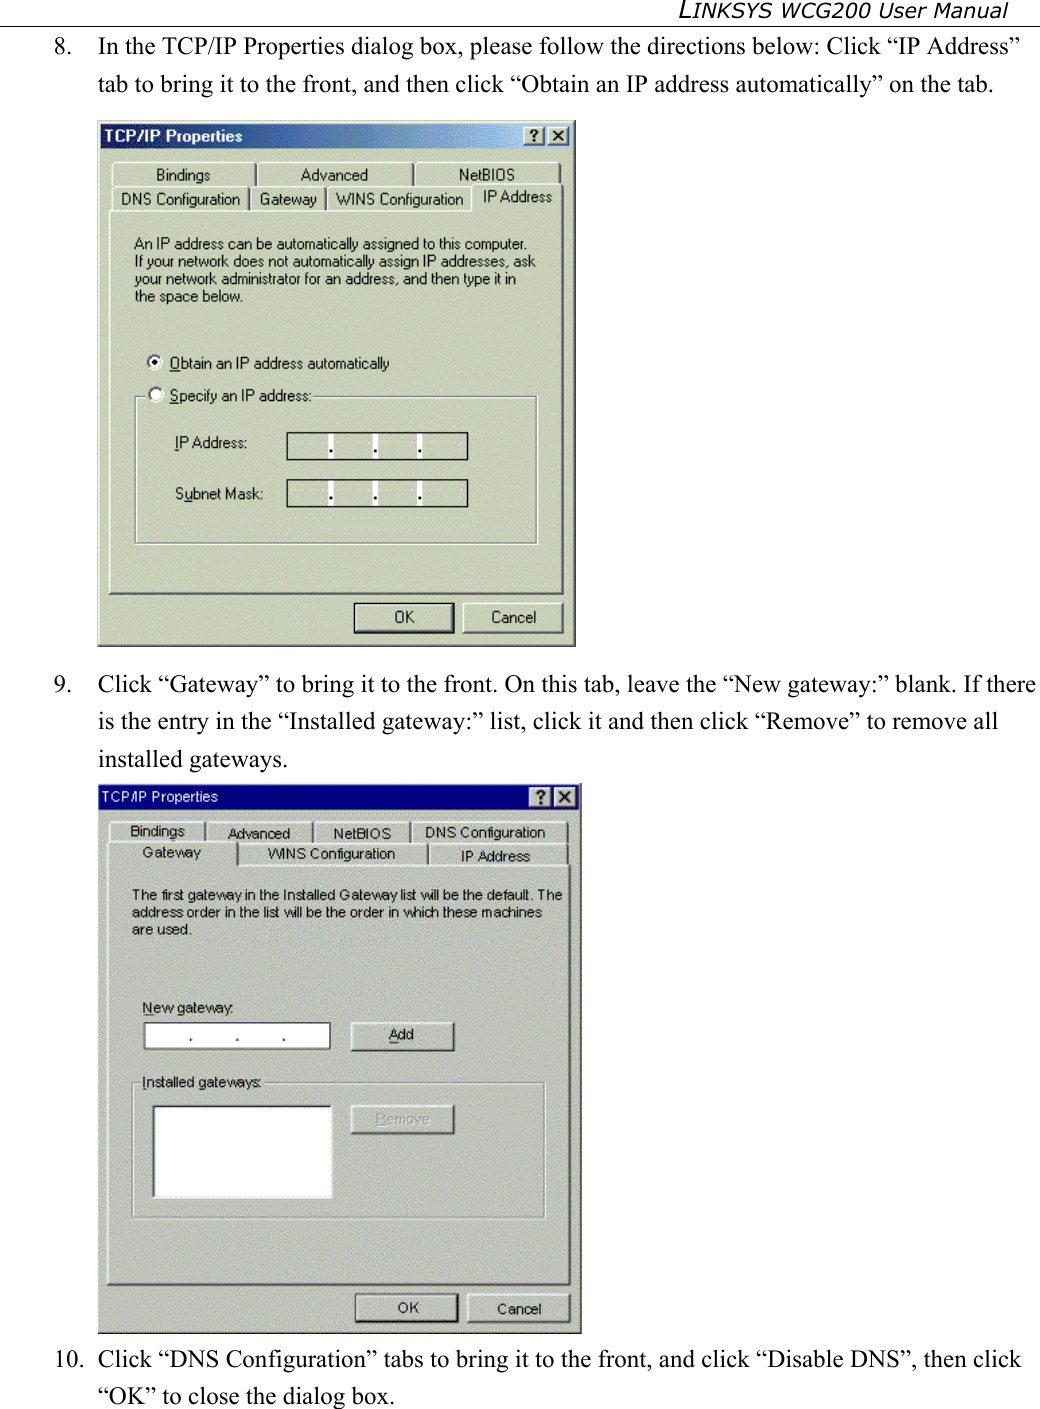 LINKSYS WCG200 User Manual   8.  In the TCP/IP Properties dialog box, please follow the directions below: Click “IP Address” tab to bring it to the front, and then click “Obtain an IP address automatically” on the tab.  9.  Click “Gateway” to bring it to the front. On this tab, leave the “New gateway:” blank. If there is the entry in the “Installed gateway:” list, click it and then click “Remove” to remove all installed gateways.  10.  Click “DNS Configuration” tabs to bring it to the front, and click “Disable DNS”, then click “OK” to close the dialog box. 